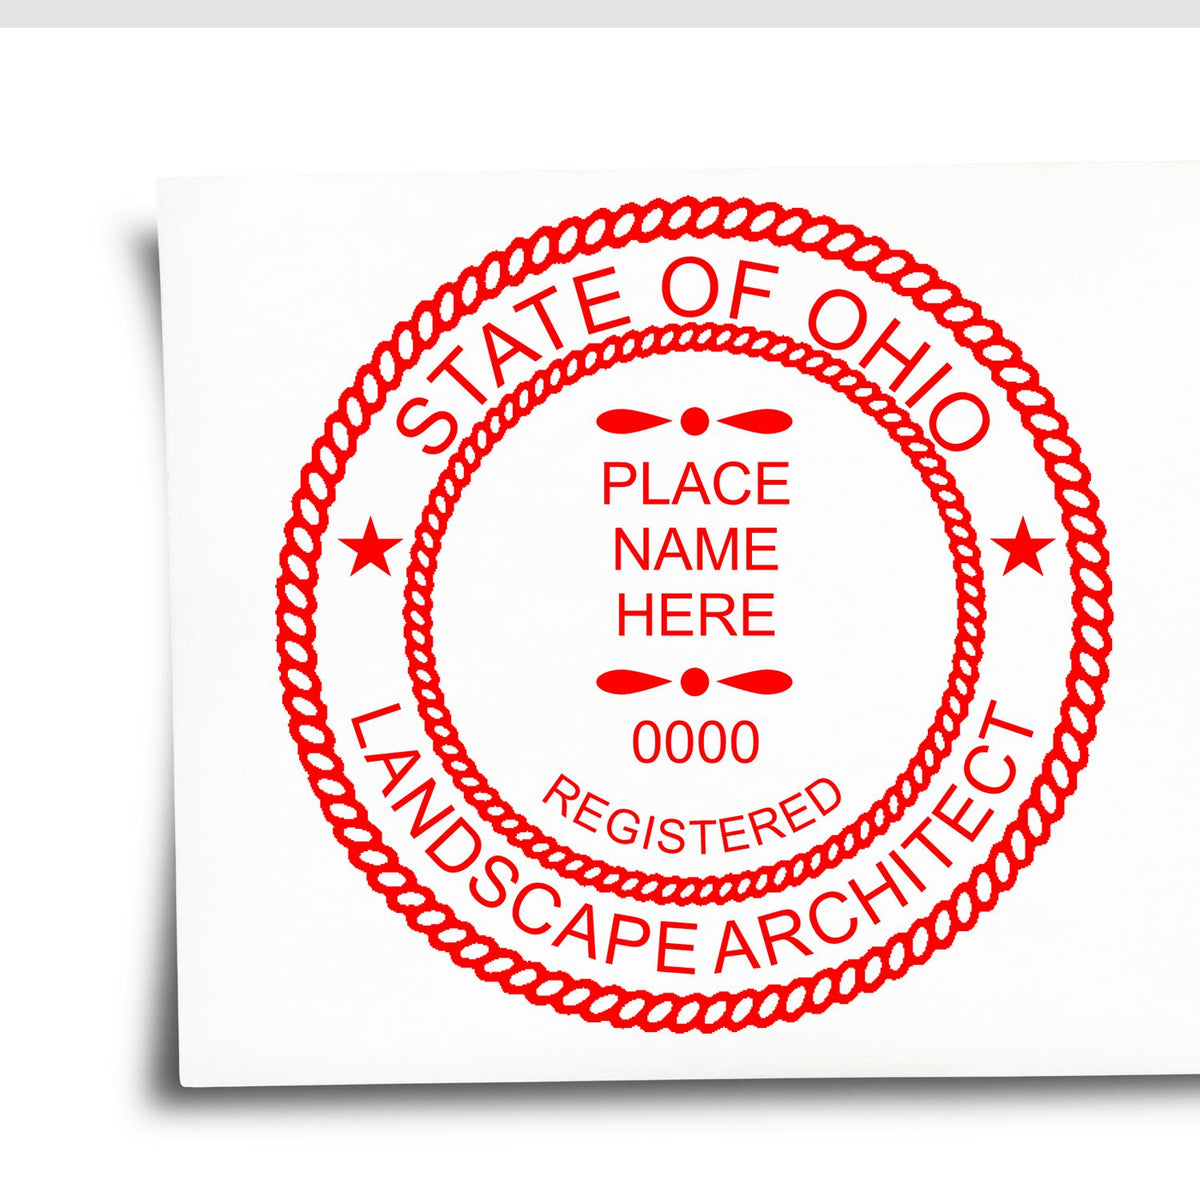 A photograph of the Digital Ohio Landscape Architect Stamp stamp impression reveals a vivid, professional image of the on paper.